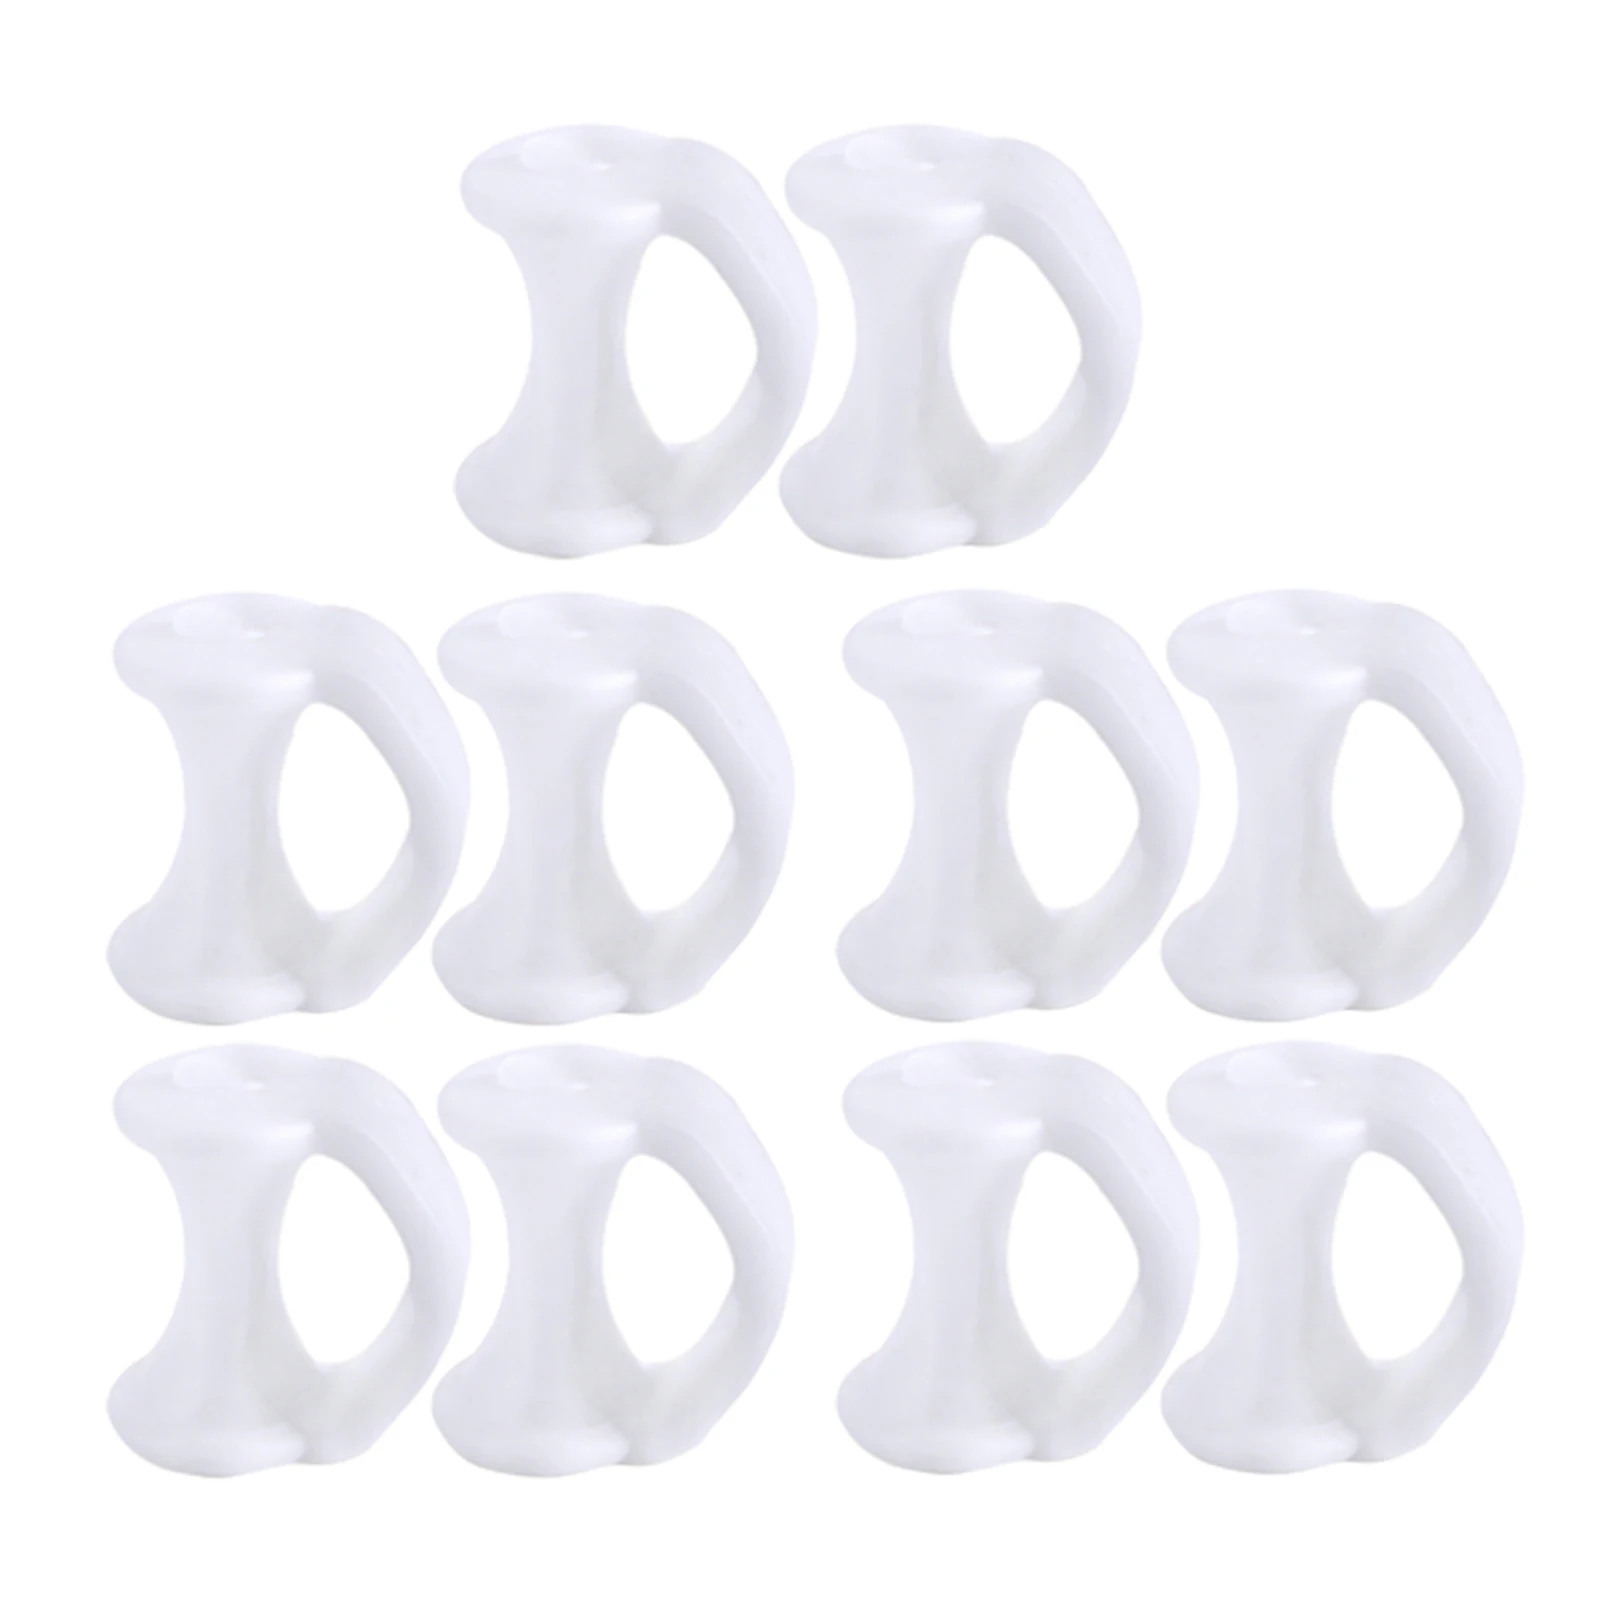 10 Packs Sleeves Pinky Toe Corrector Toe Separators for Overlapping Toes